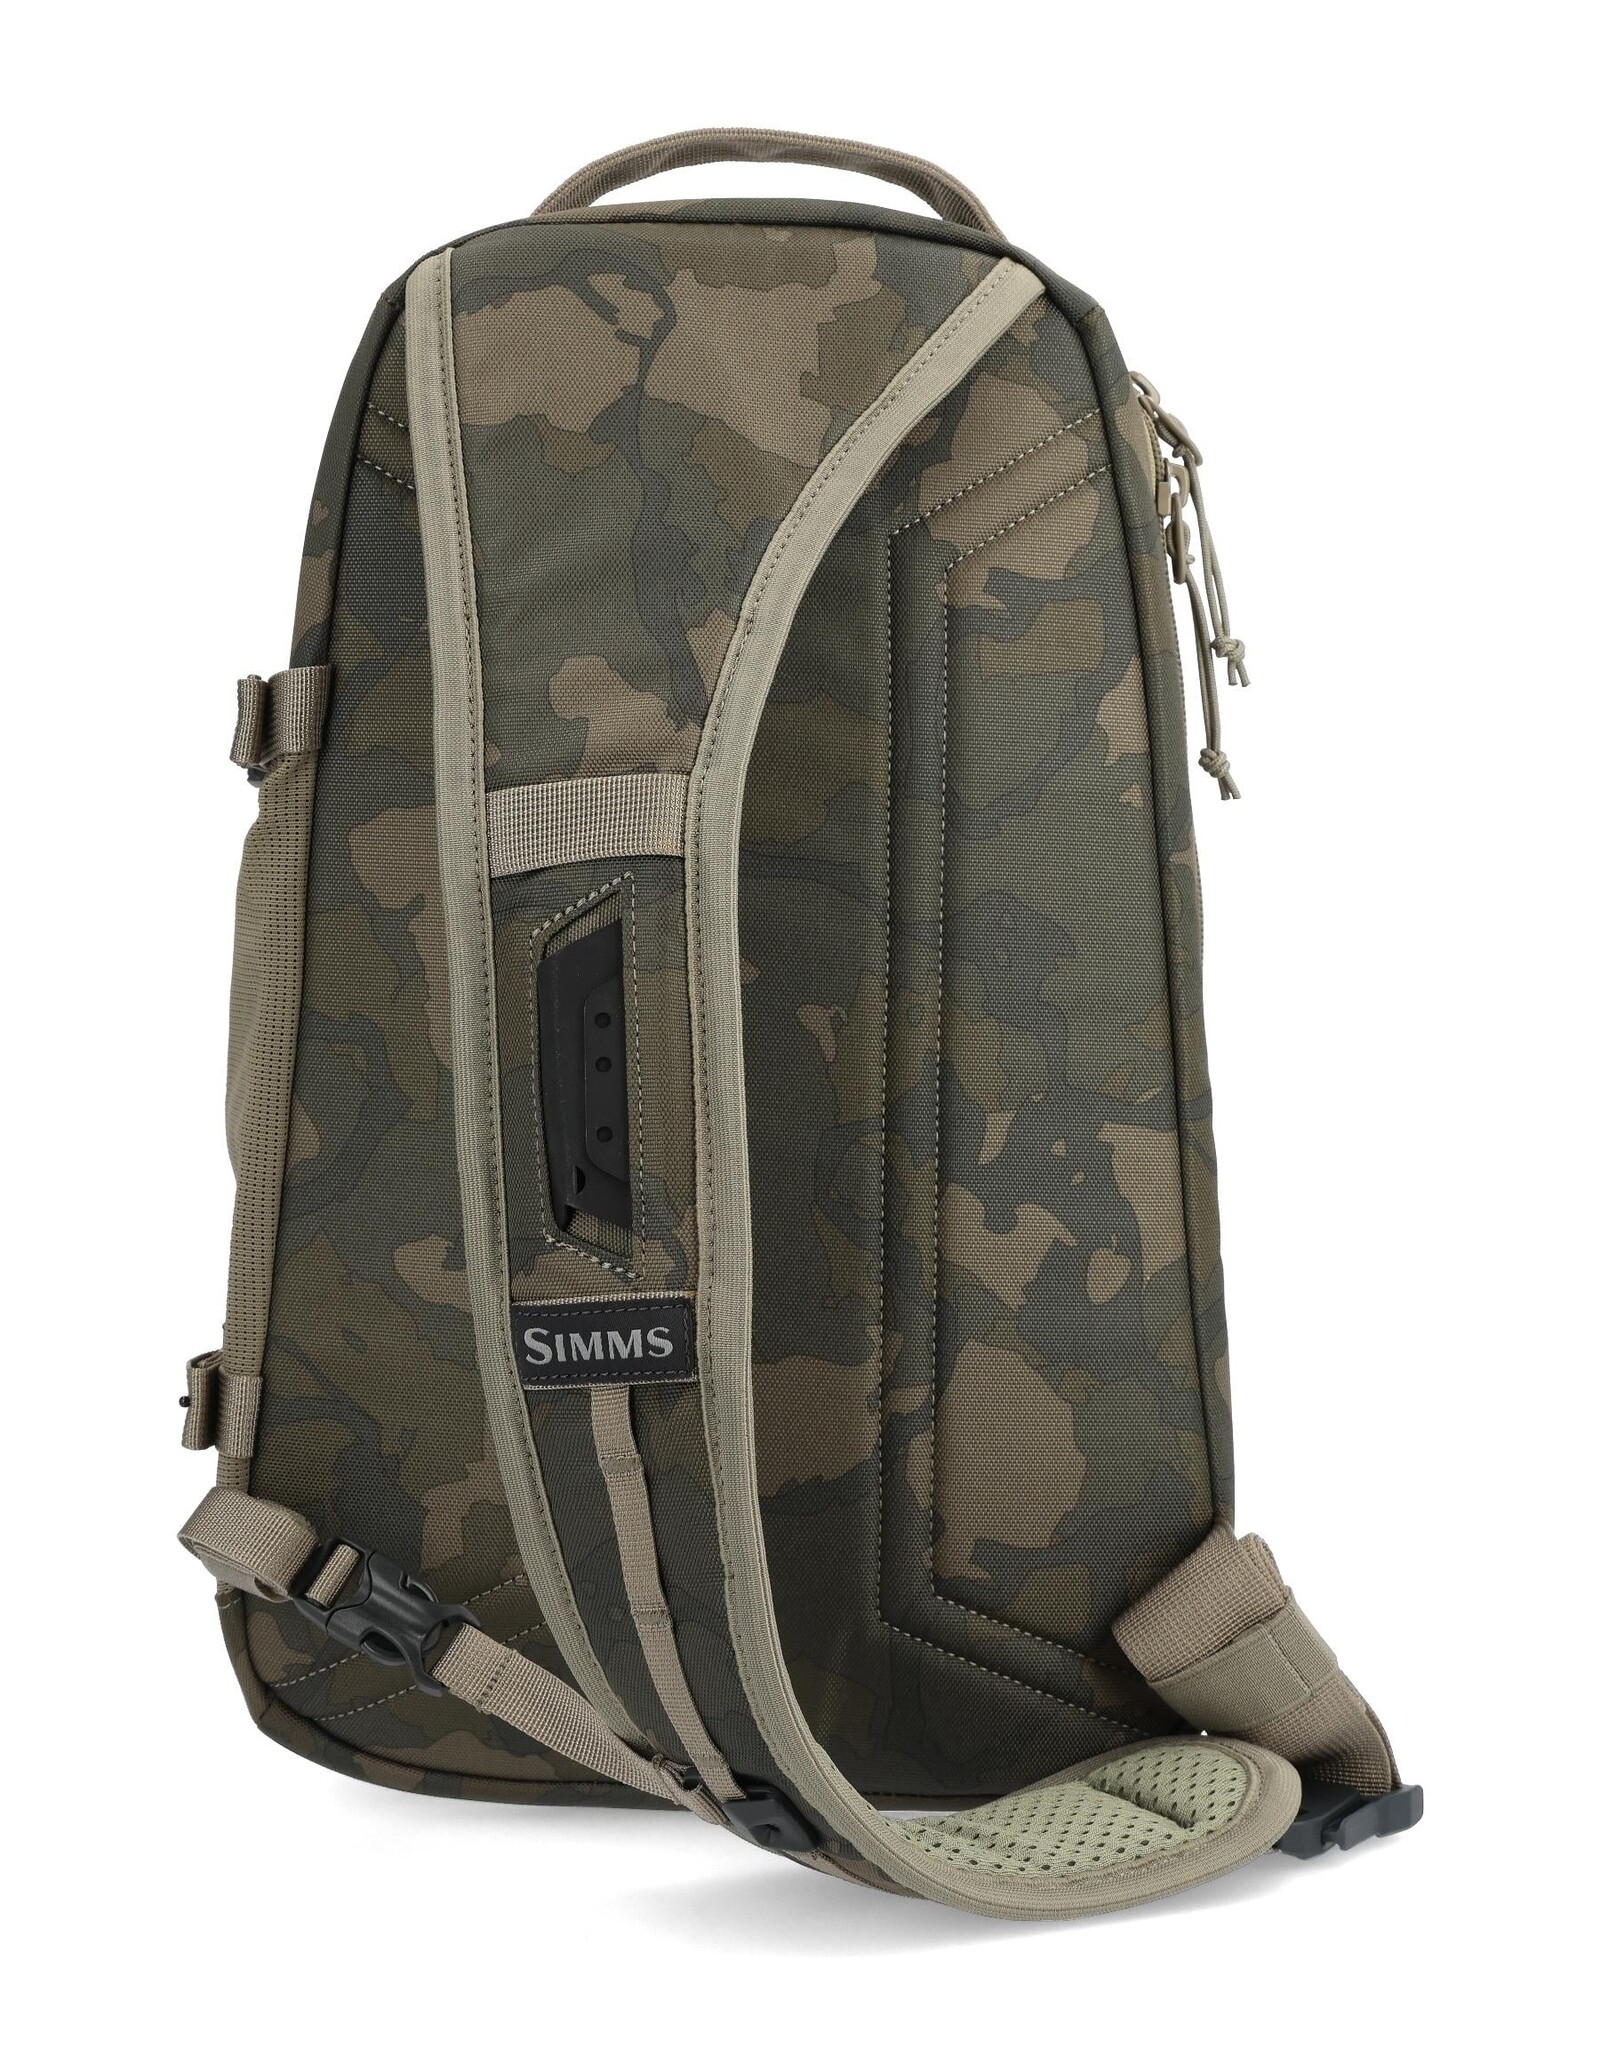 Simms Fishing Tributary Sling Pack - Regiment Camo Olive Drab